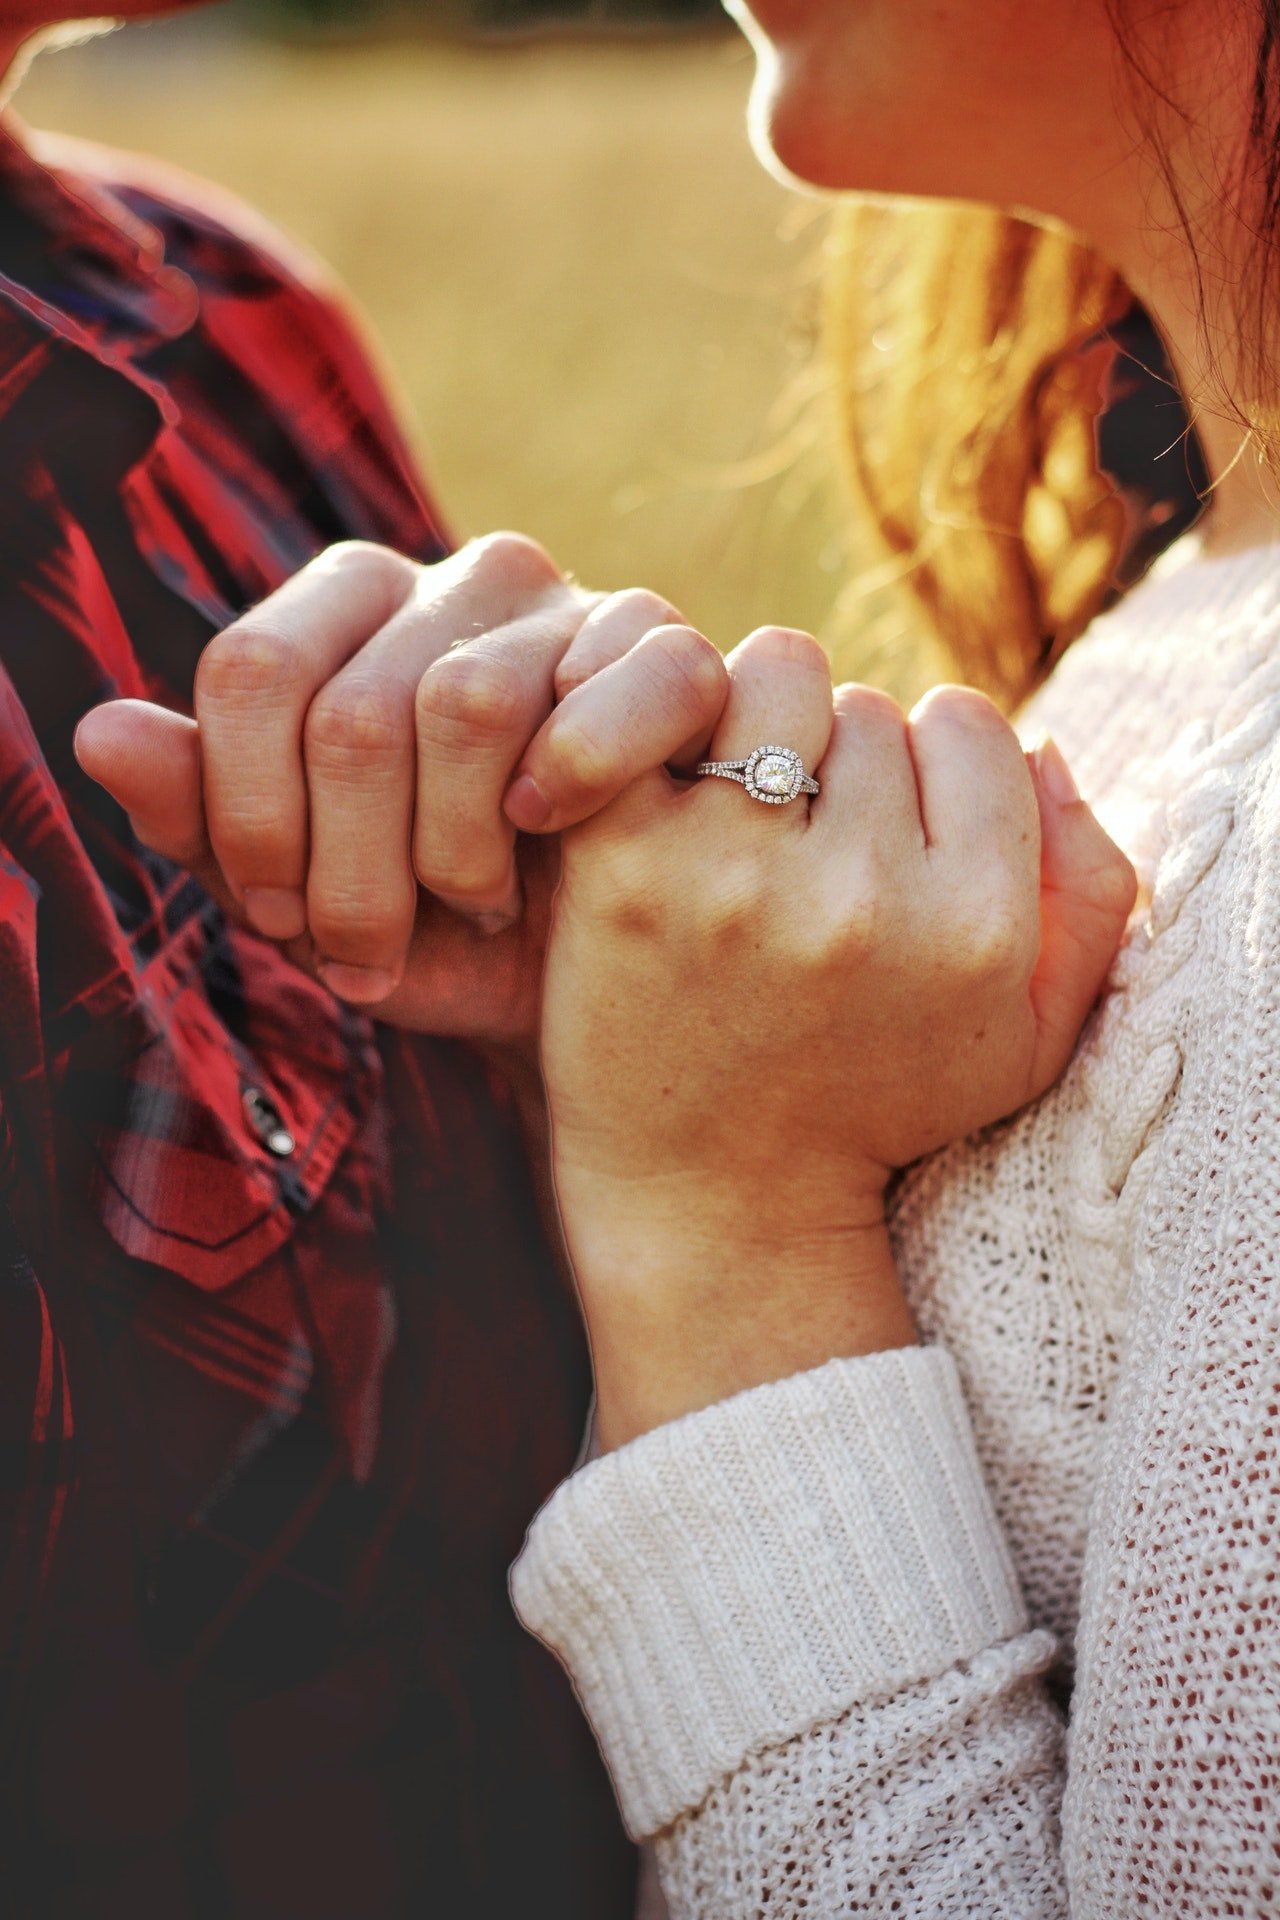 Happy couple showing off their ring | Photo: Pexels